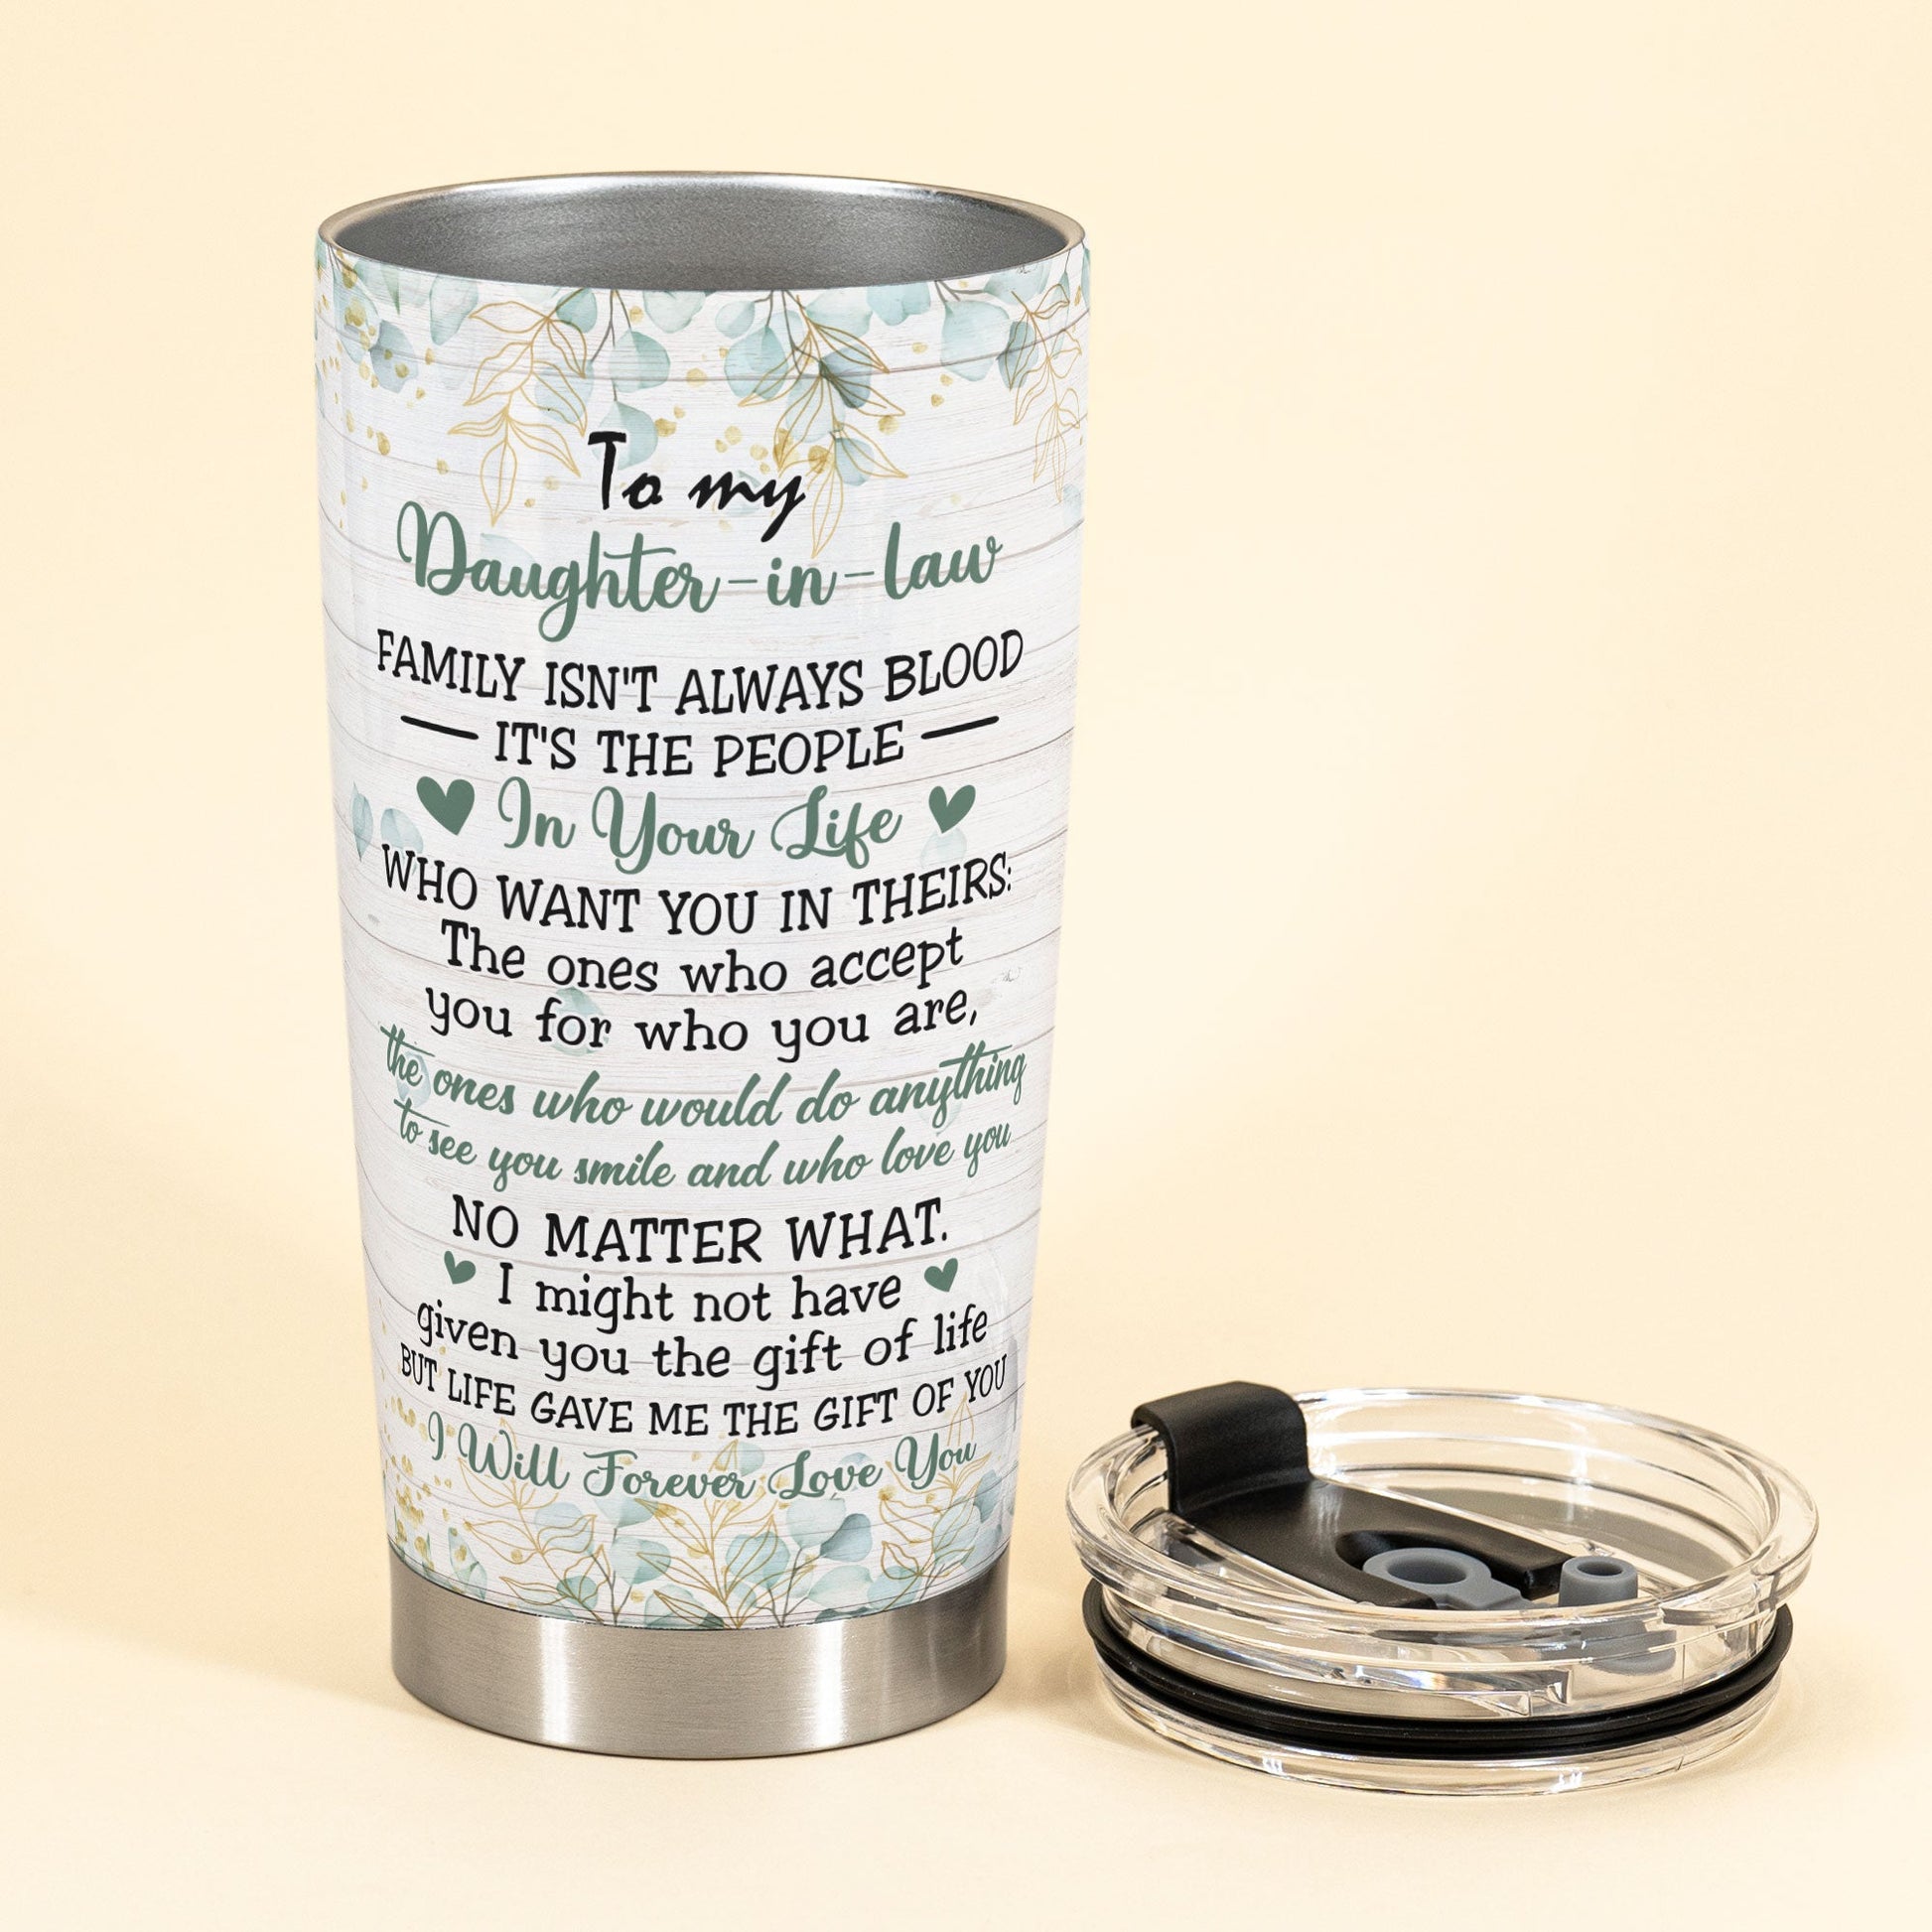 Mother of the Bride Gifts Tumbler With Lid and Straw- Bride Mom